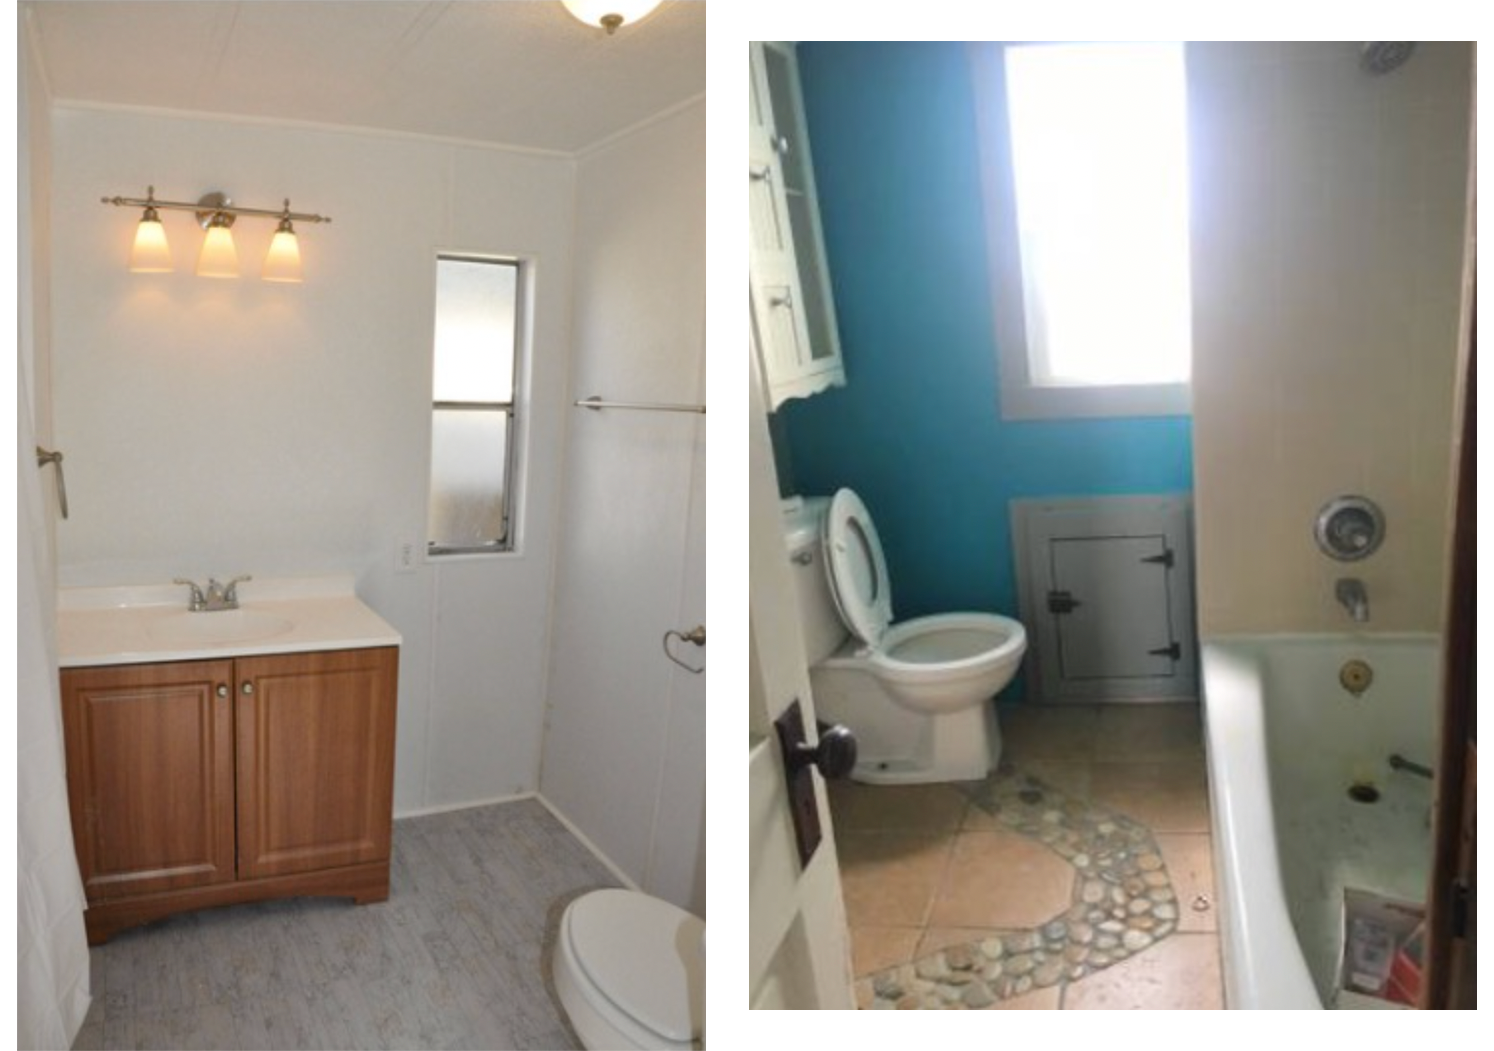 Two images of apartment listings Raegan Bird collected as part of their project First, Last, Security, one which shows a toilet with river rocks on the floor leading up to it